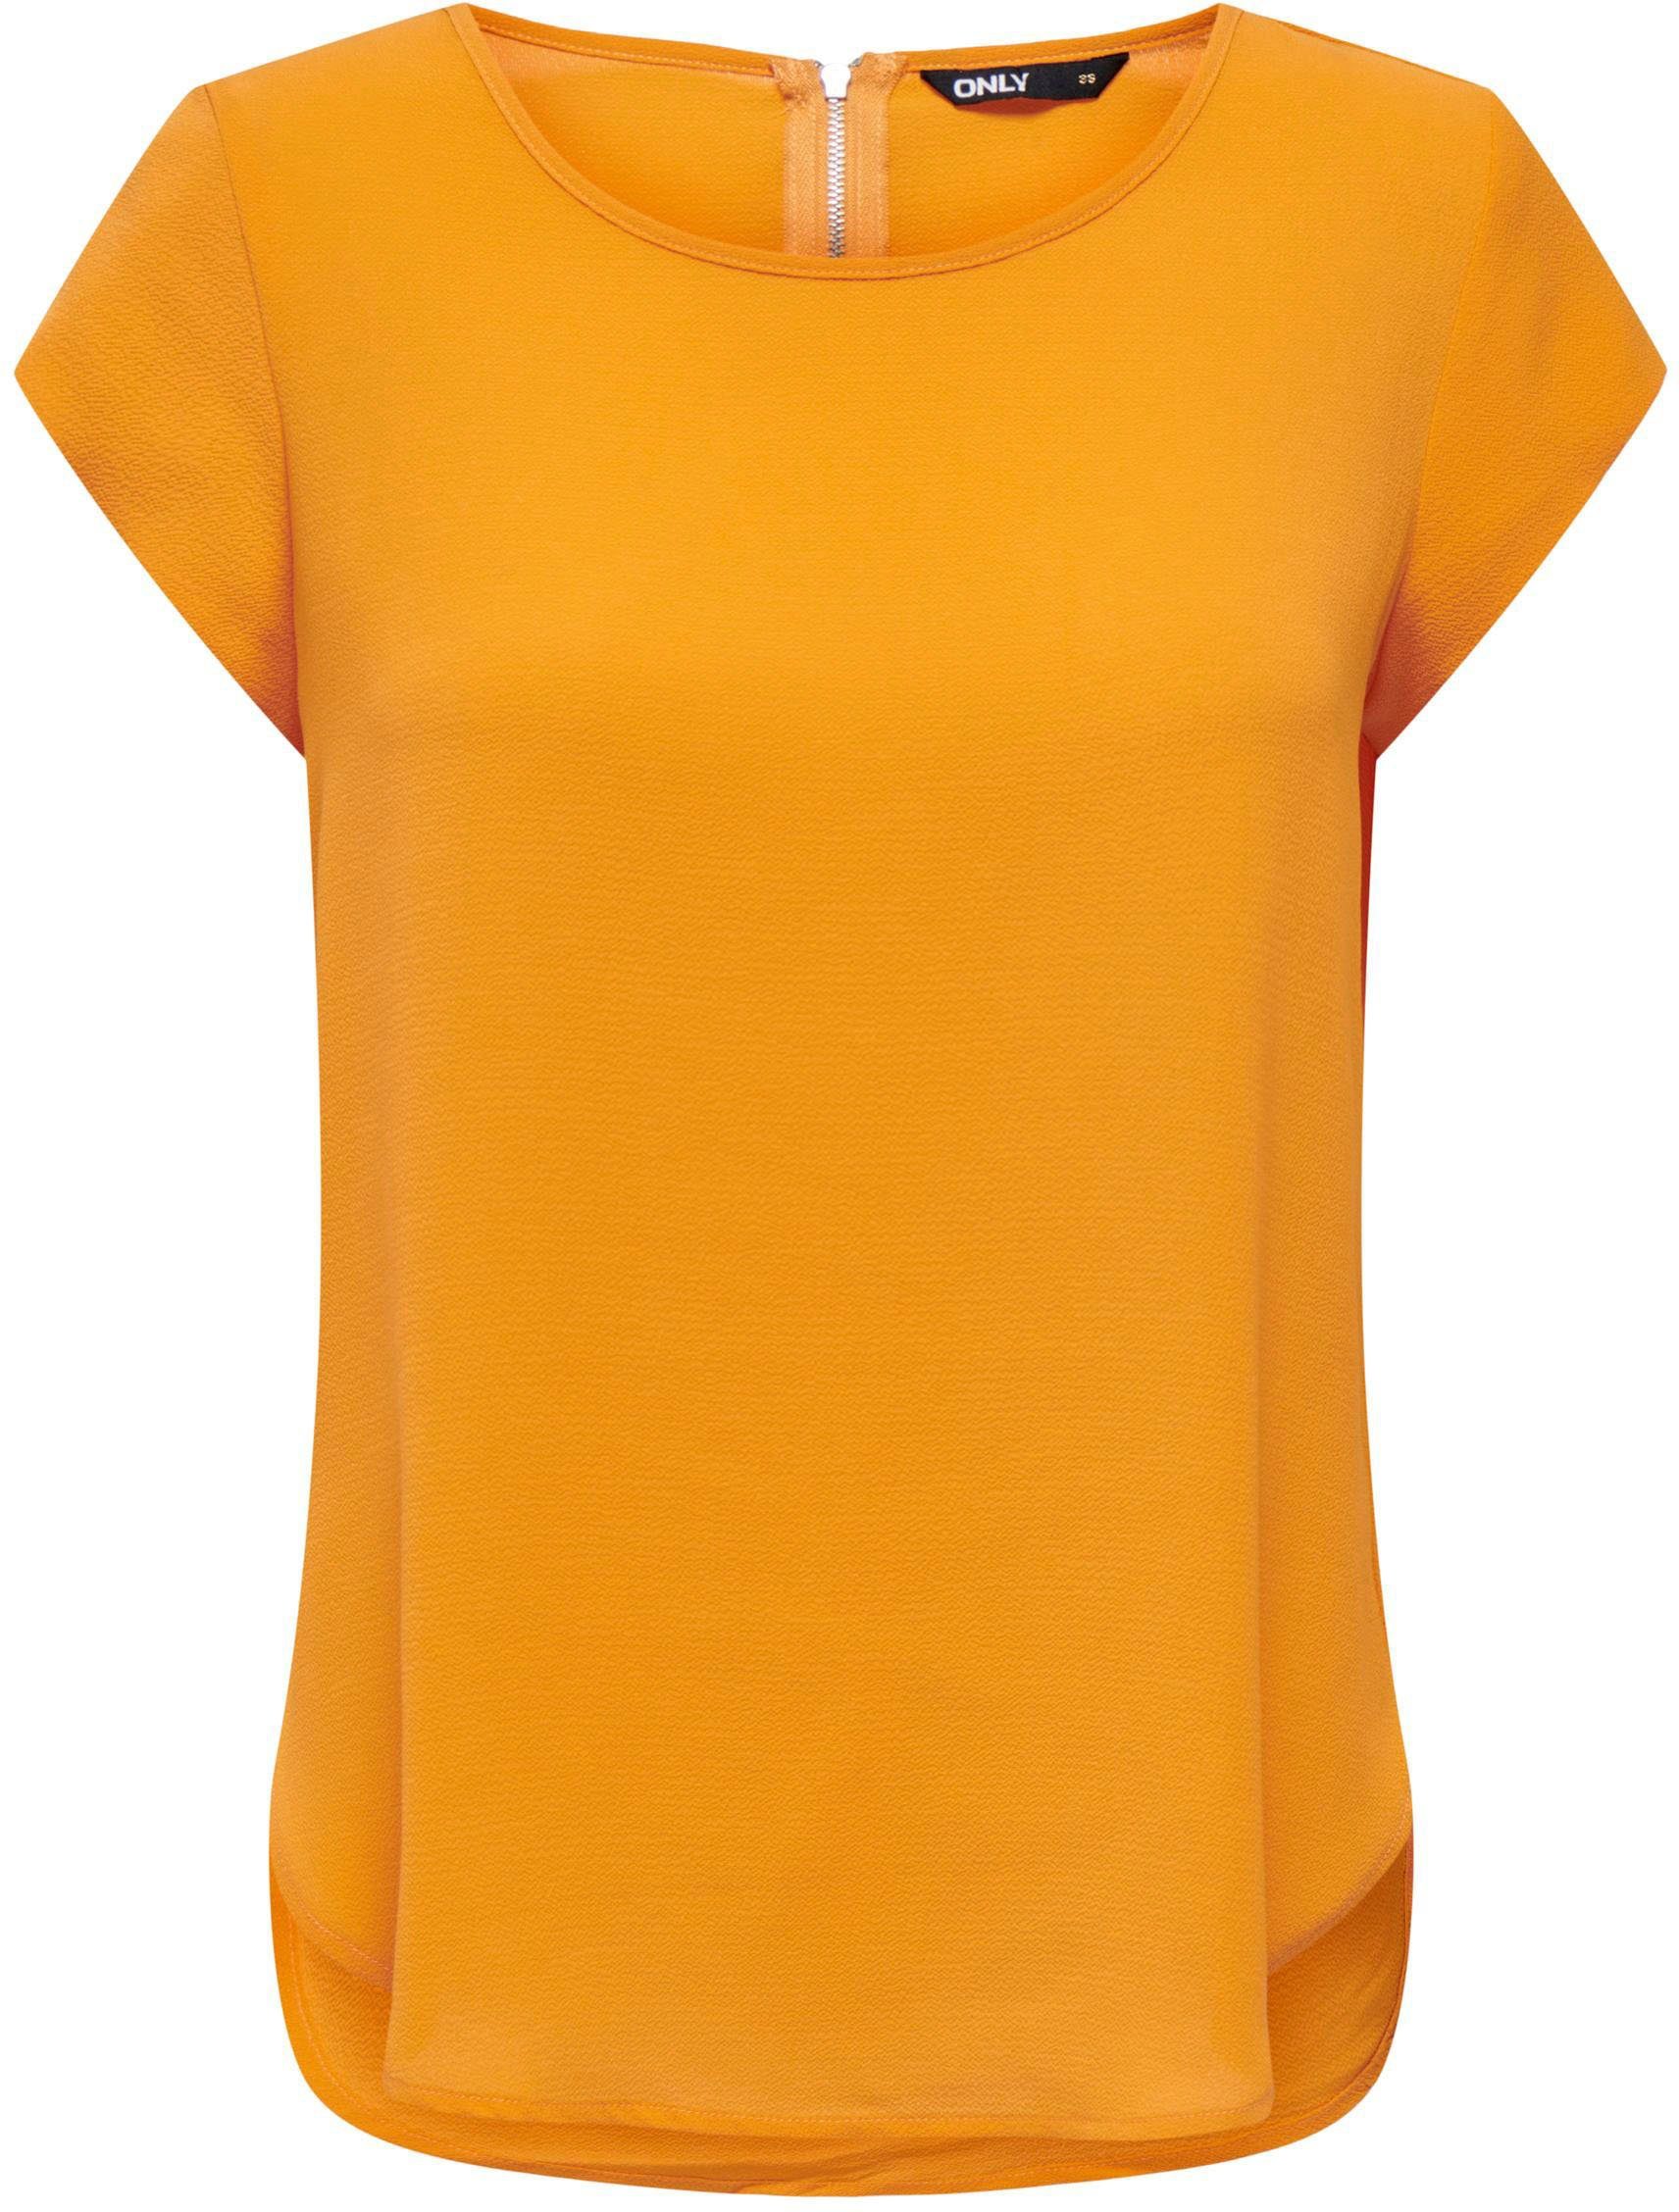 ONLVIC SOLID PTM S/S Apricot ONLY TOP Kurzarmbluse NOOS